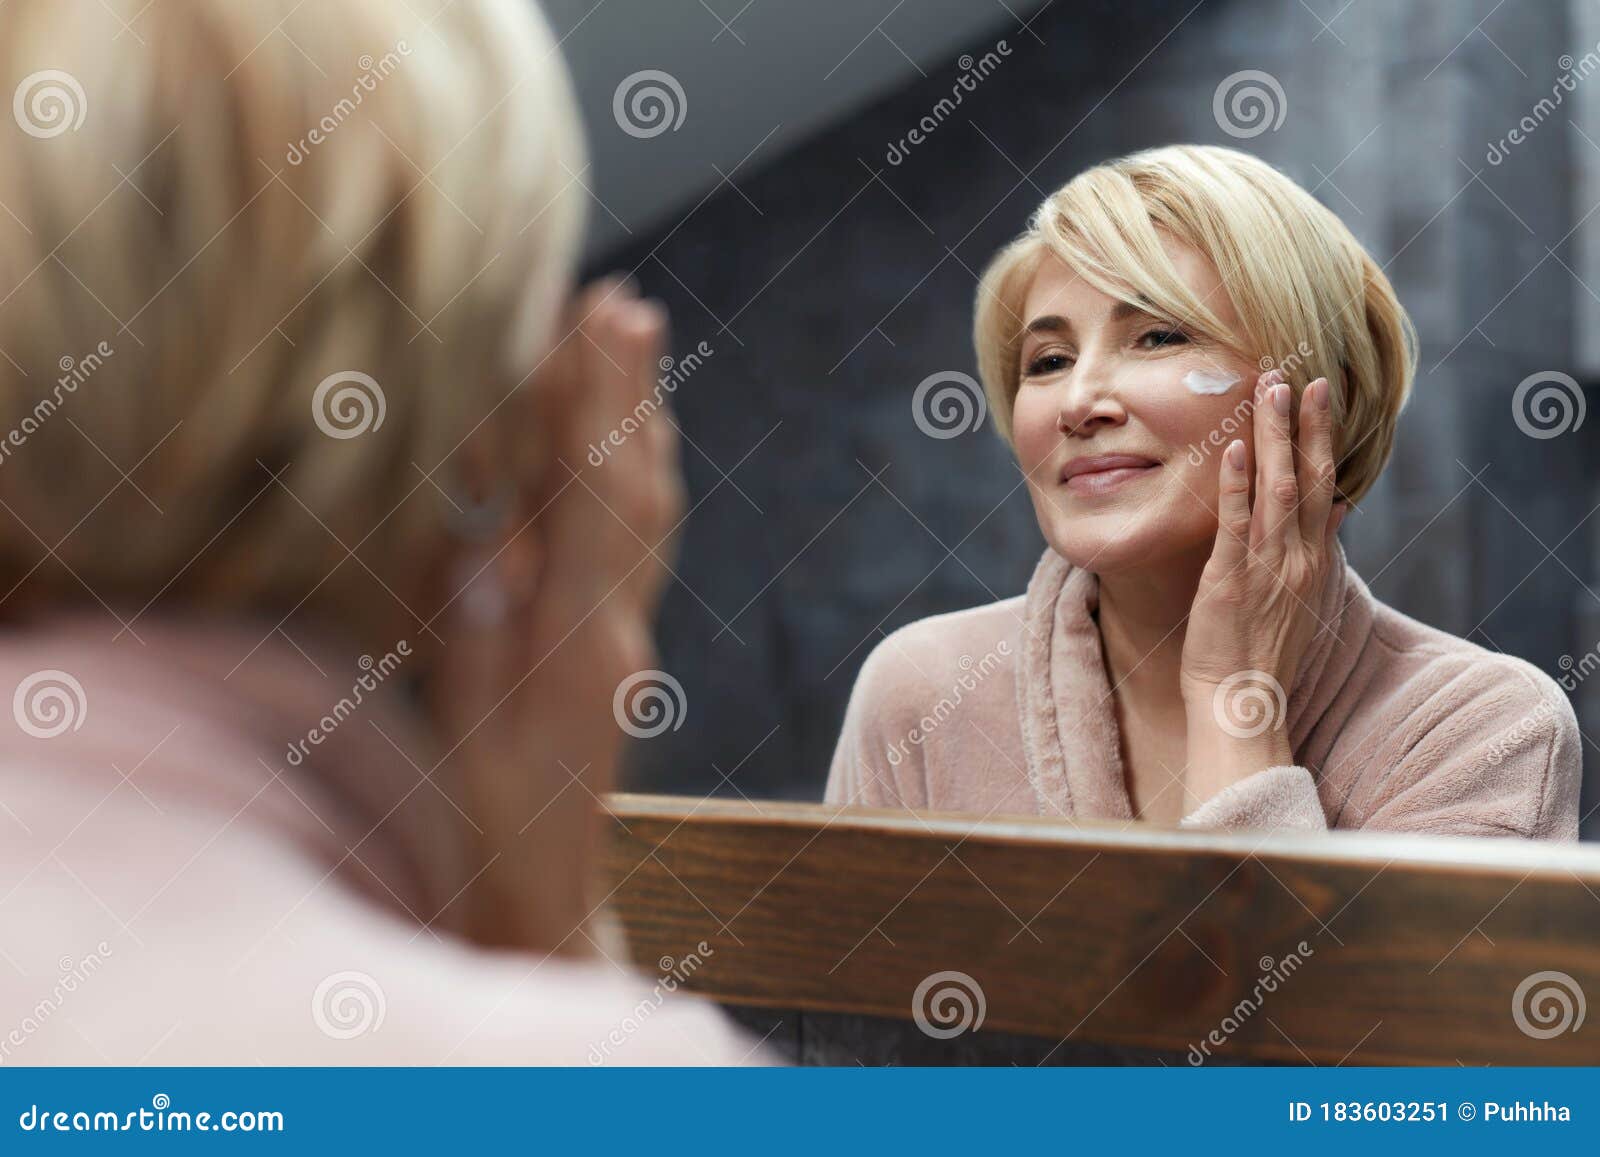 skincare routine. mature woman uses cosmetic cream on face skin in front of the mirror reflection.